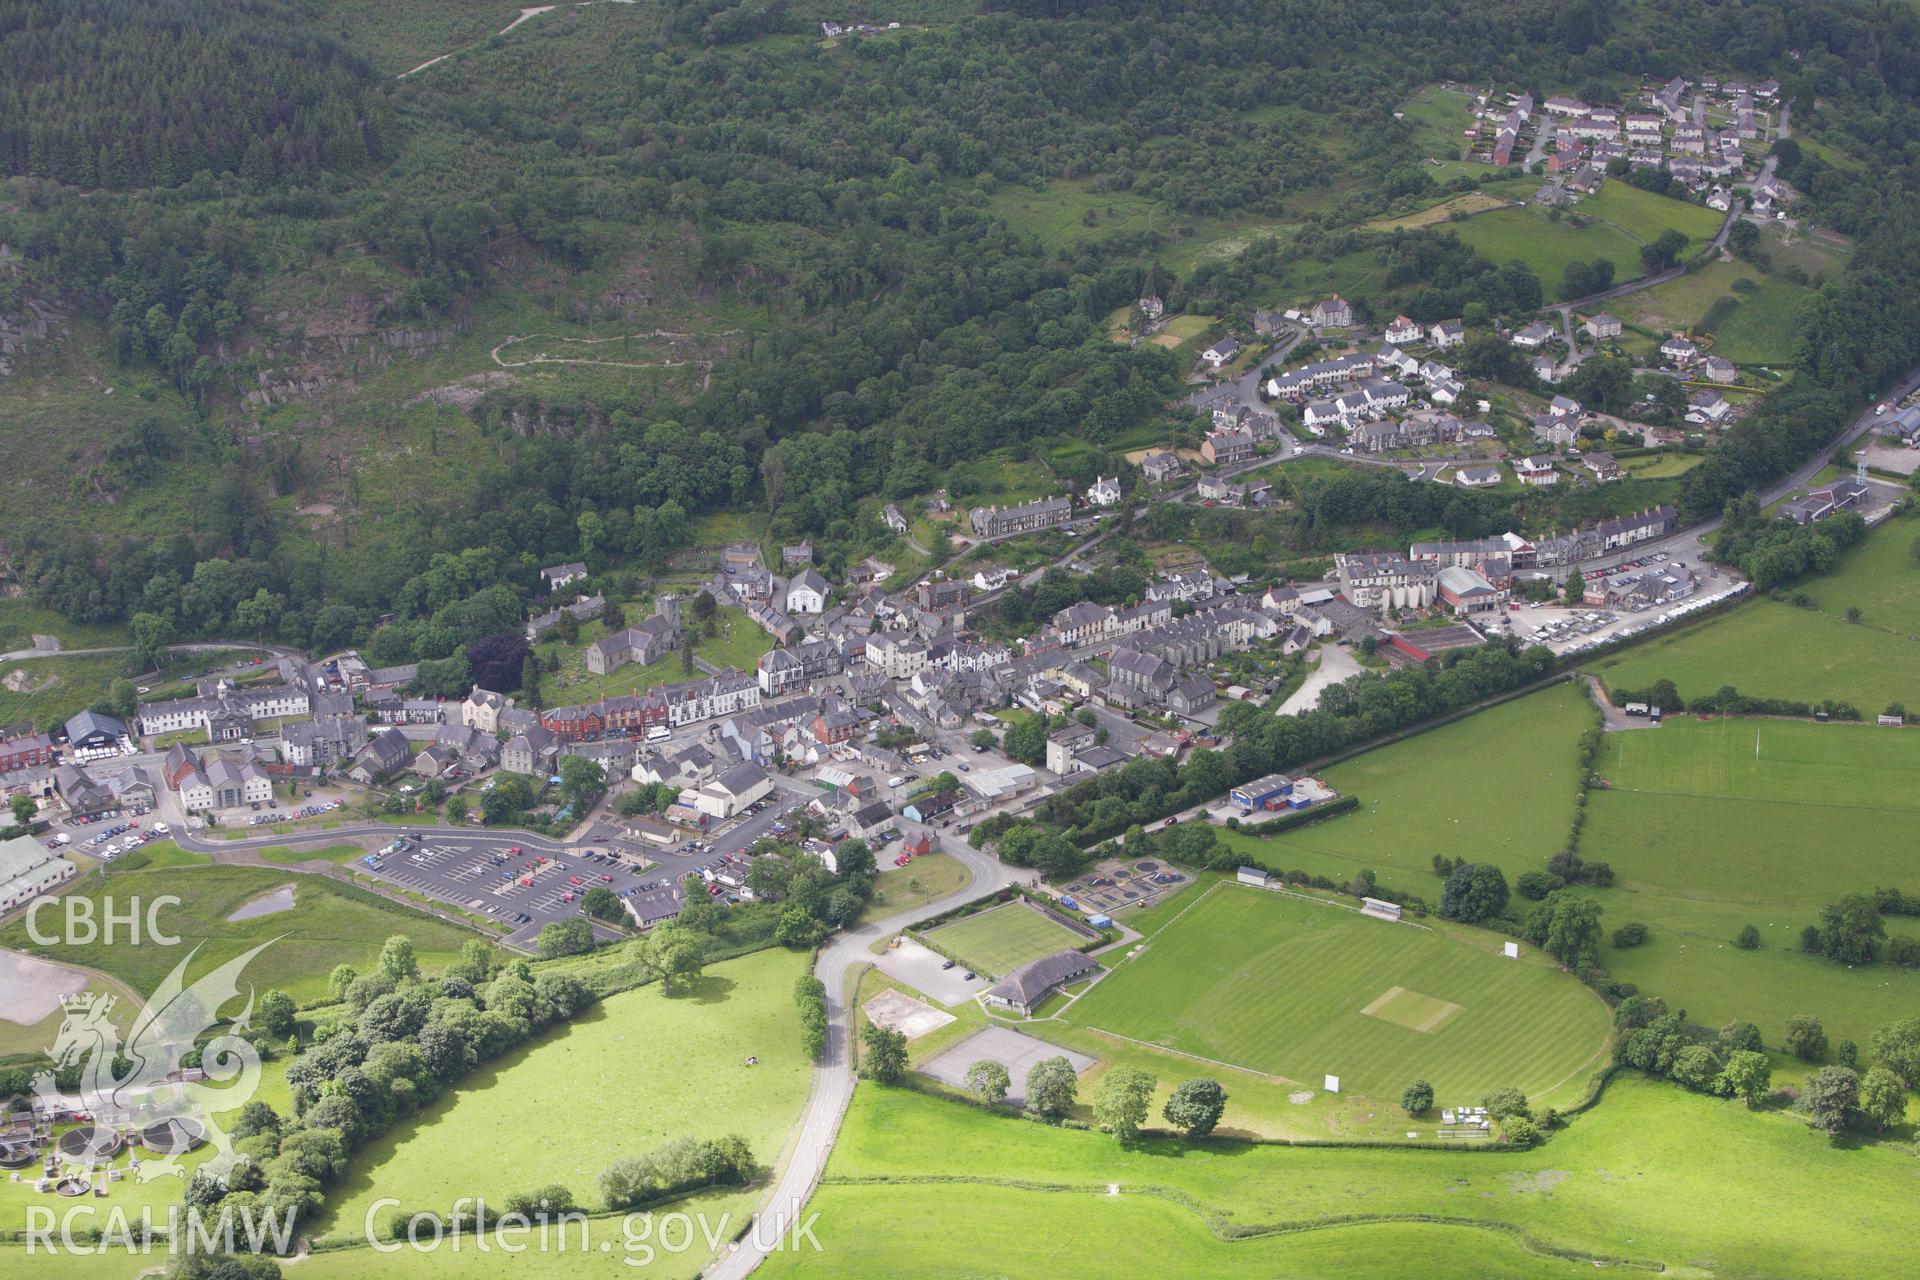 RCAHMW colour oblique photograph of  View of the town of Corwen. Taken by Toby Driver on 19/06/2009.